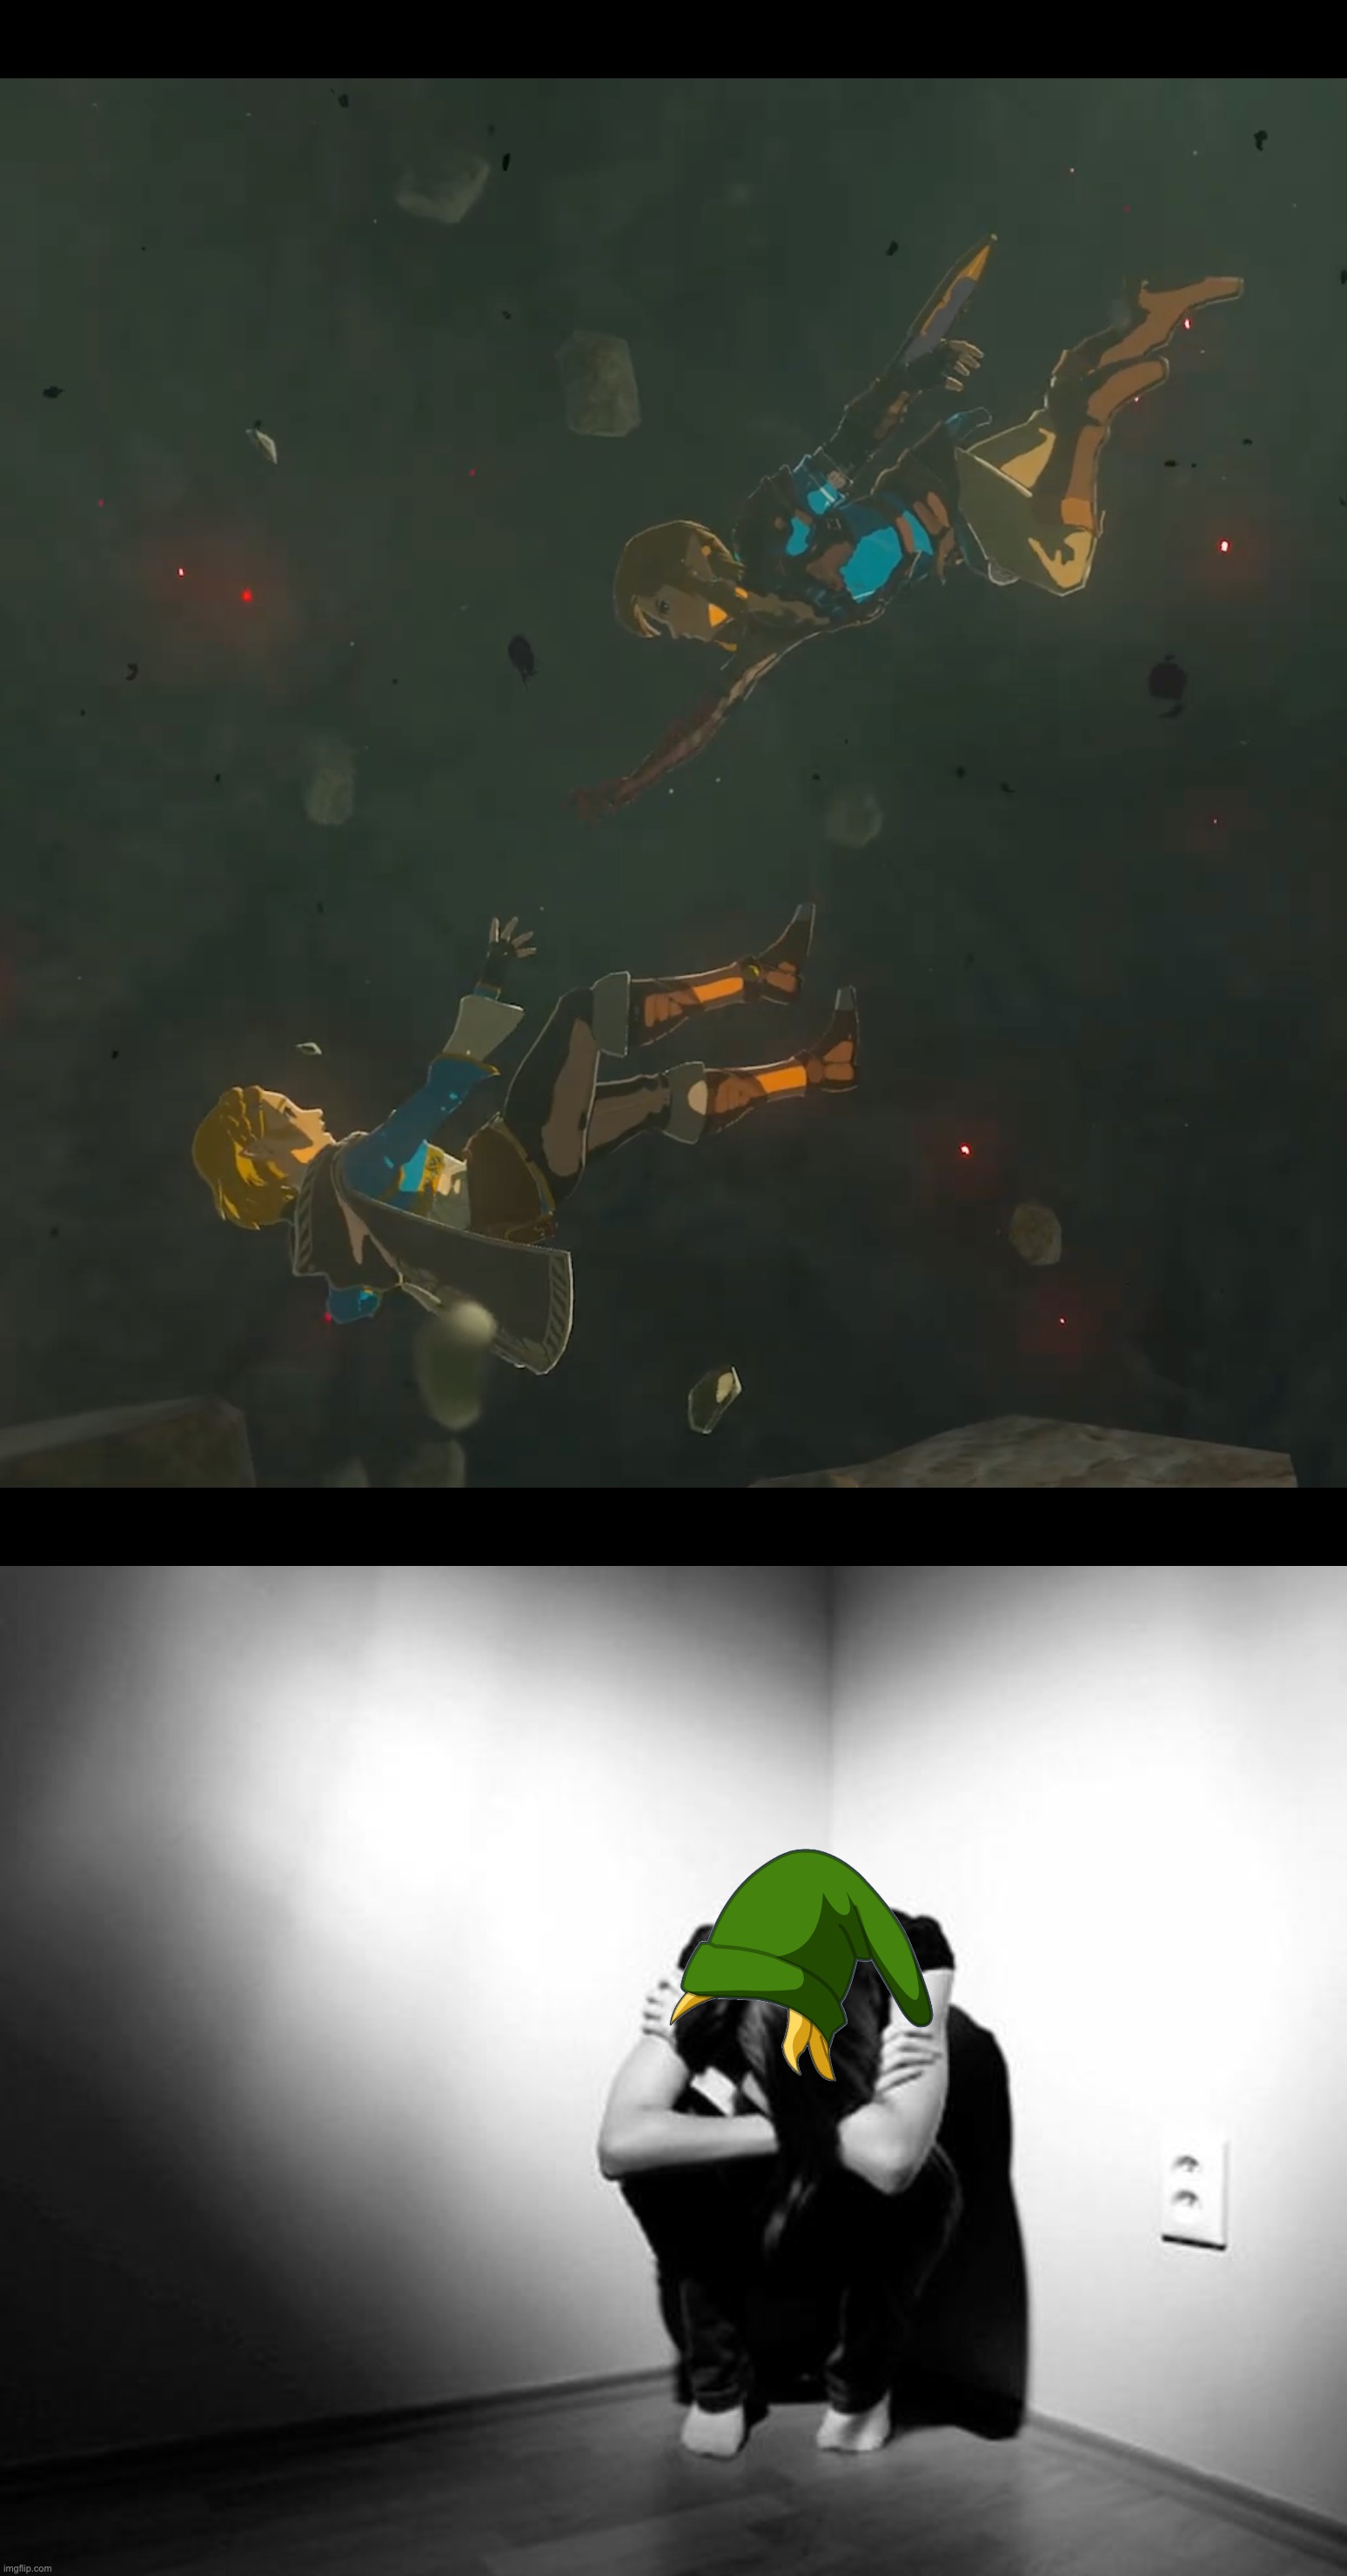 poor Link | image tagged in depression sadness hurt pain anxiety,legend of zelda,tears of the kingdom,zelda,link | made w/ Imgflip meme maker